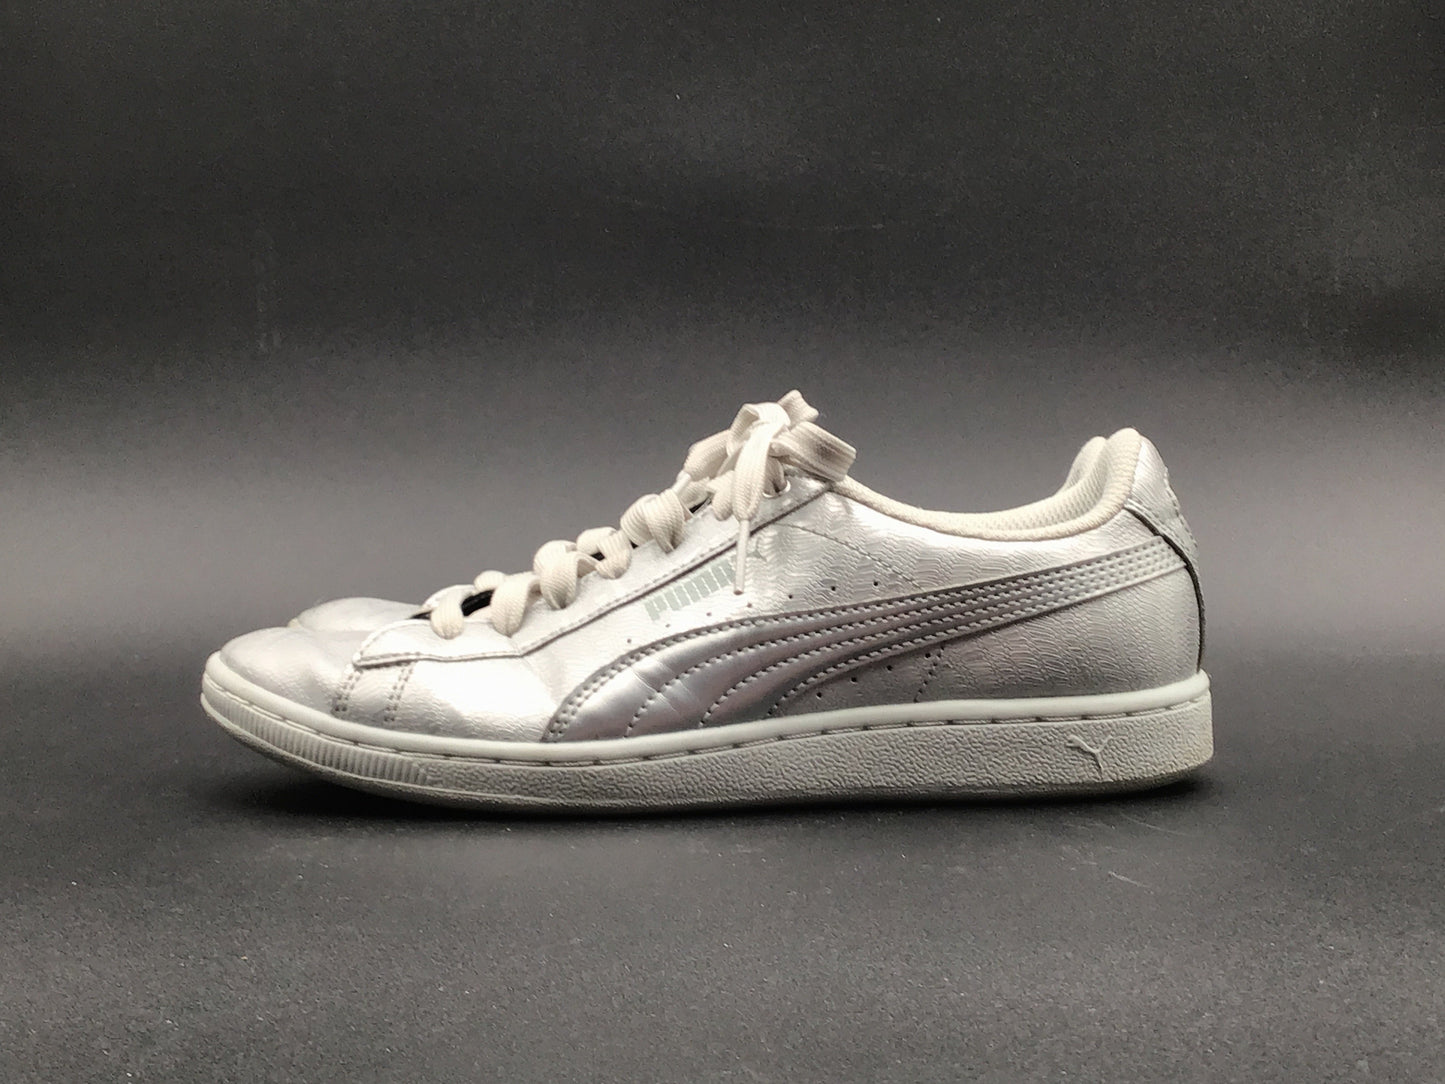 Silver Shoes Sneakers Puma, Size 7.5